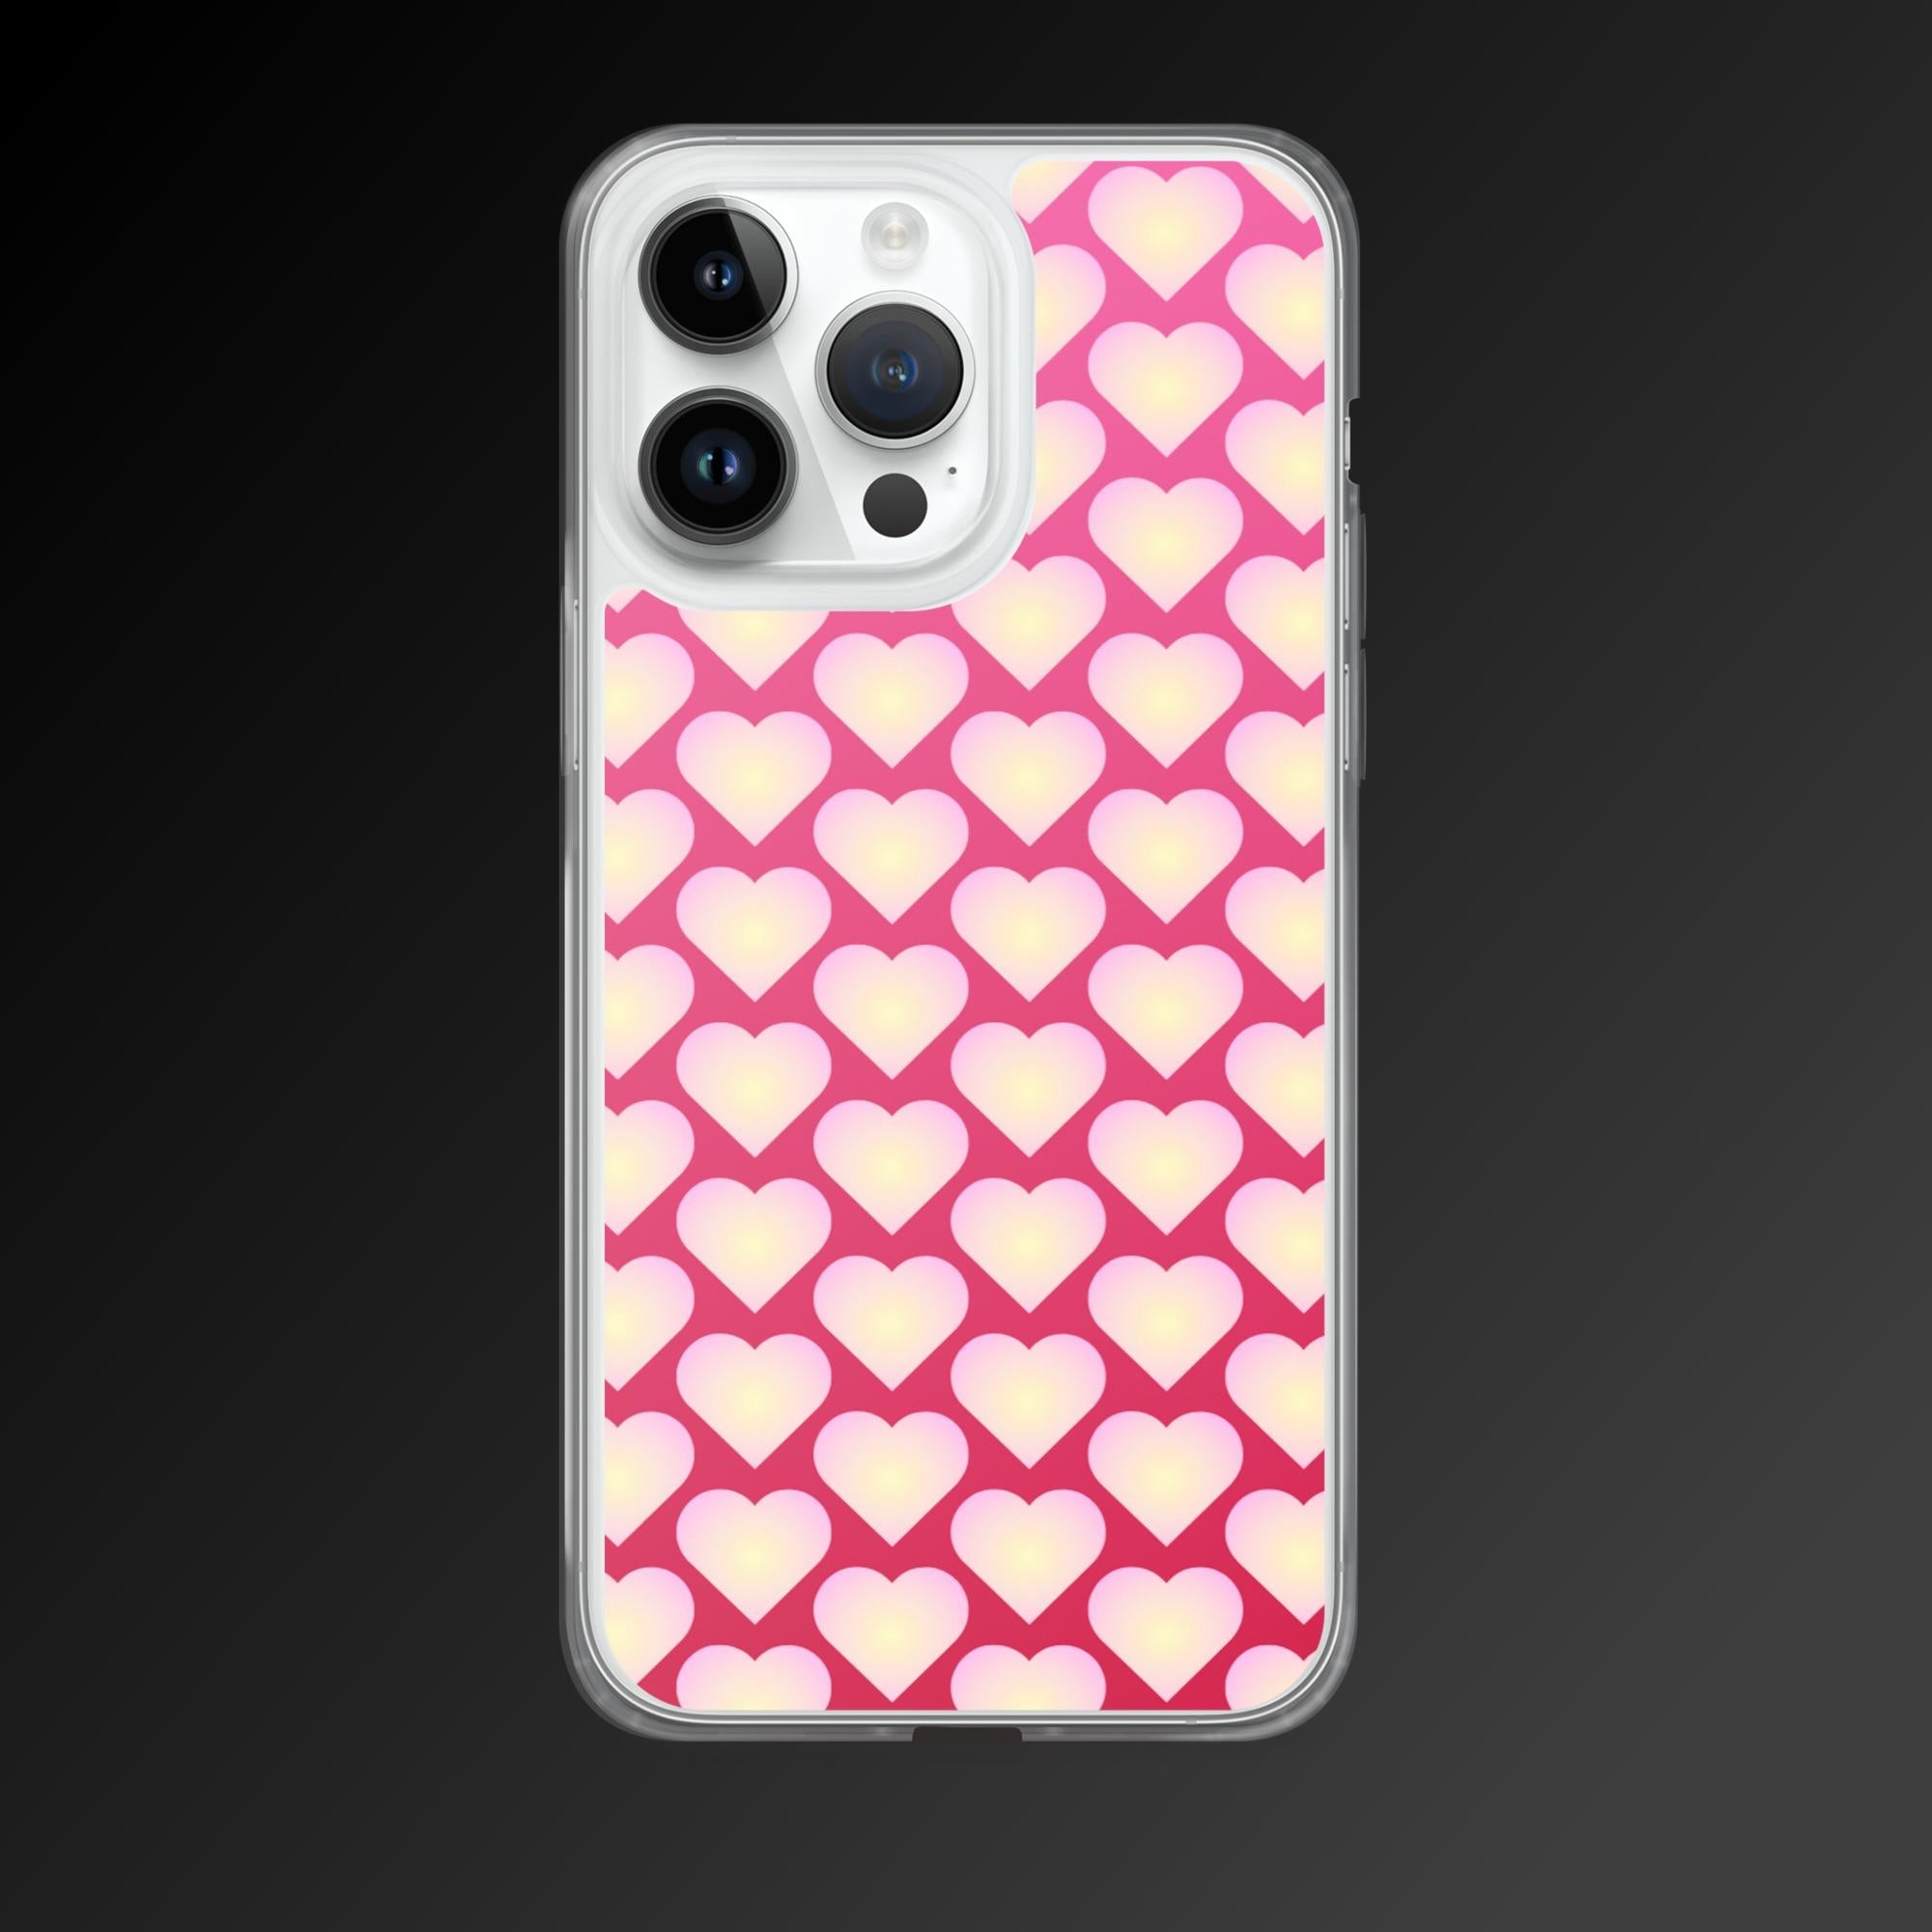 "White hearts pattern" clear iphone case - Clear iphone case - Ever colorful